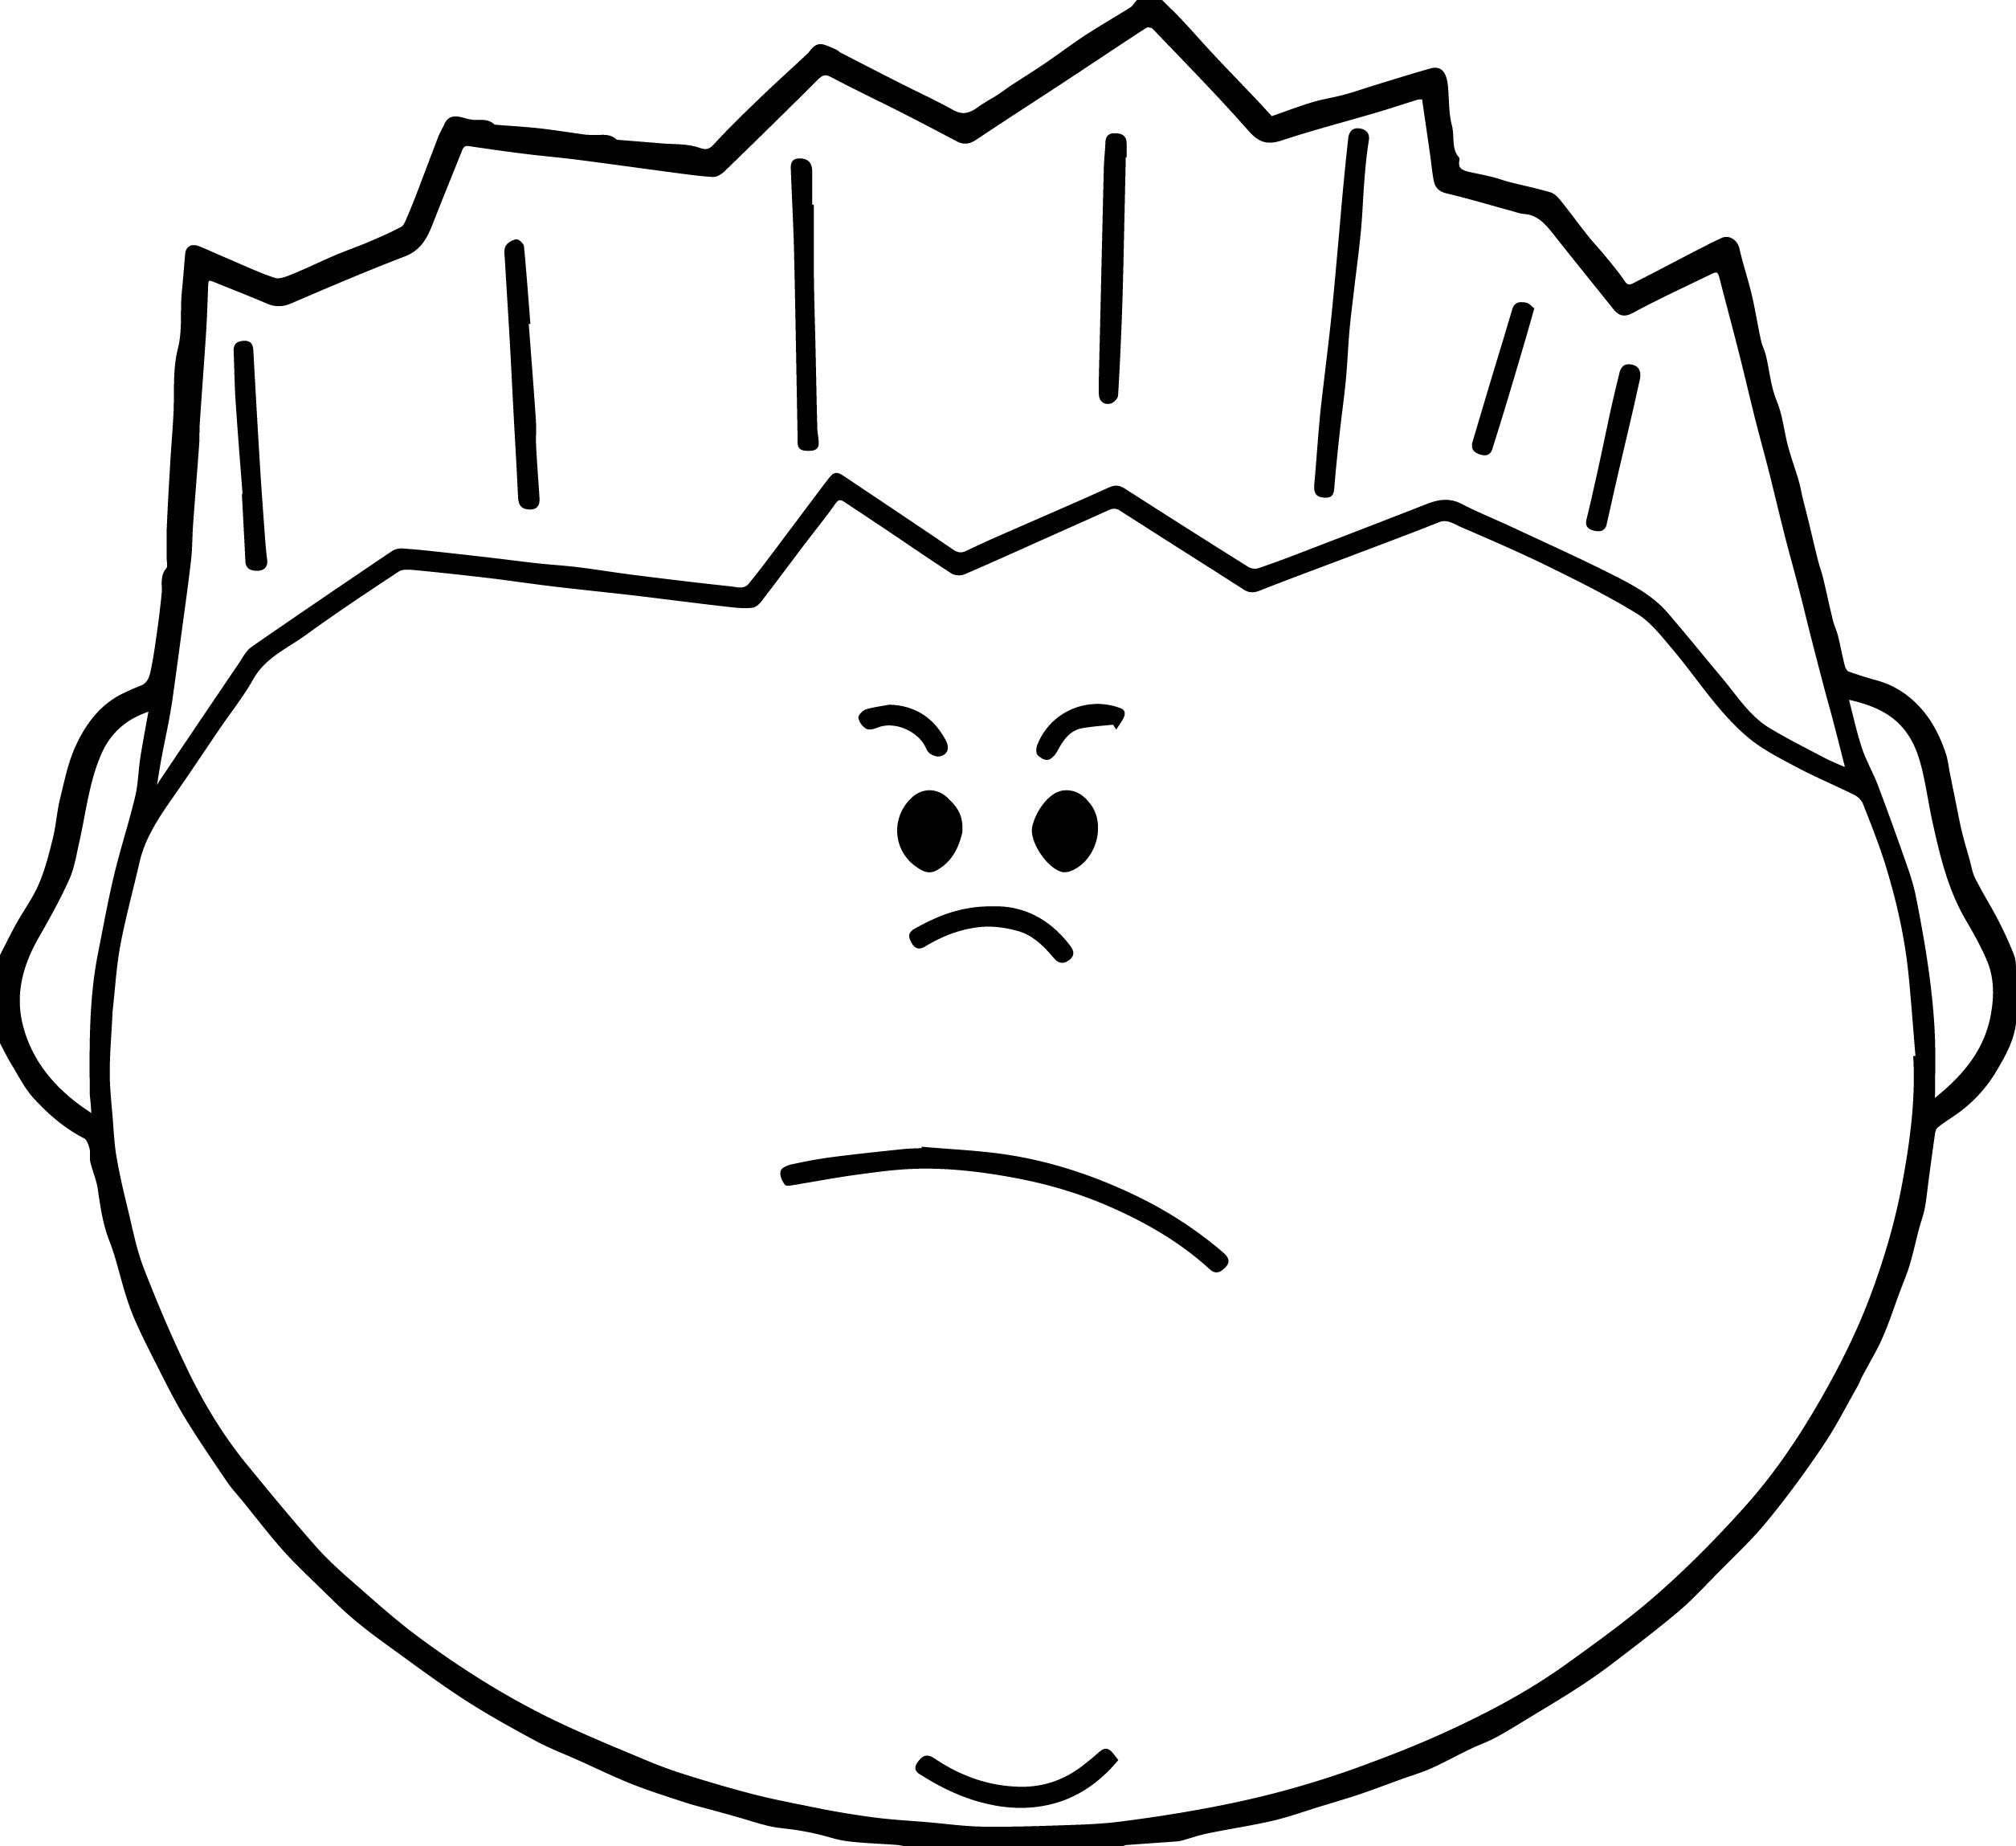 Coloring Pages Of Boys Faces
 Angry Boy Face Coloring Page